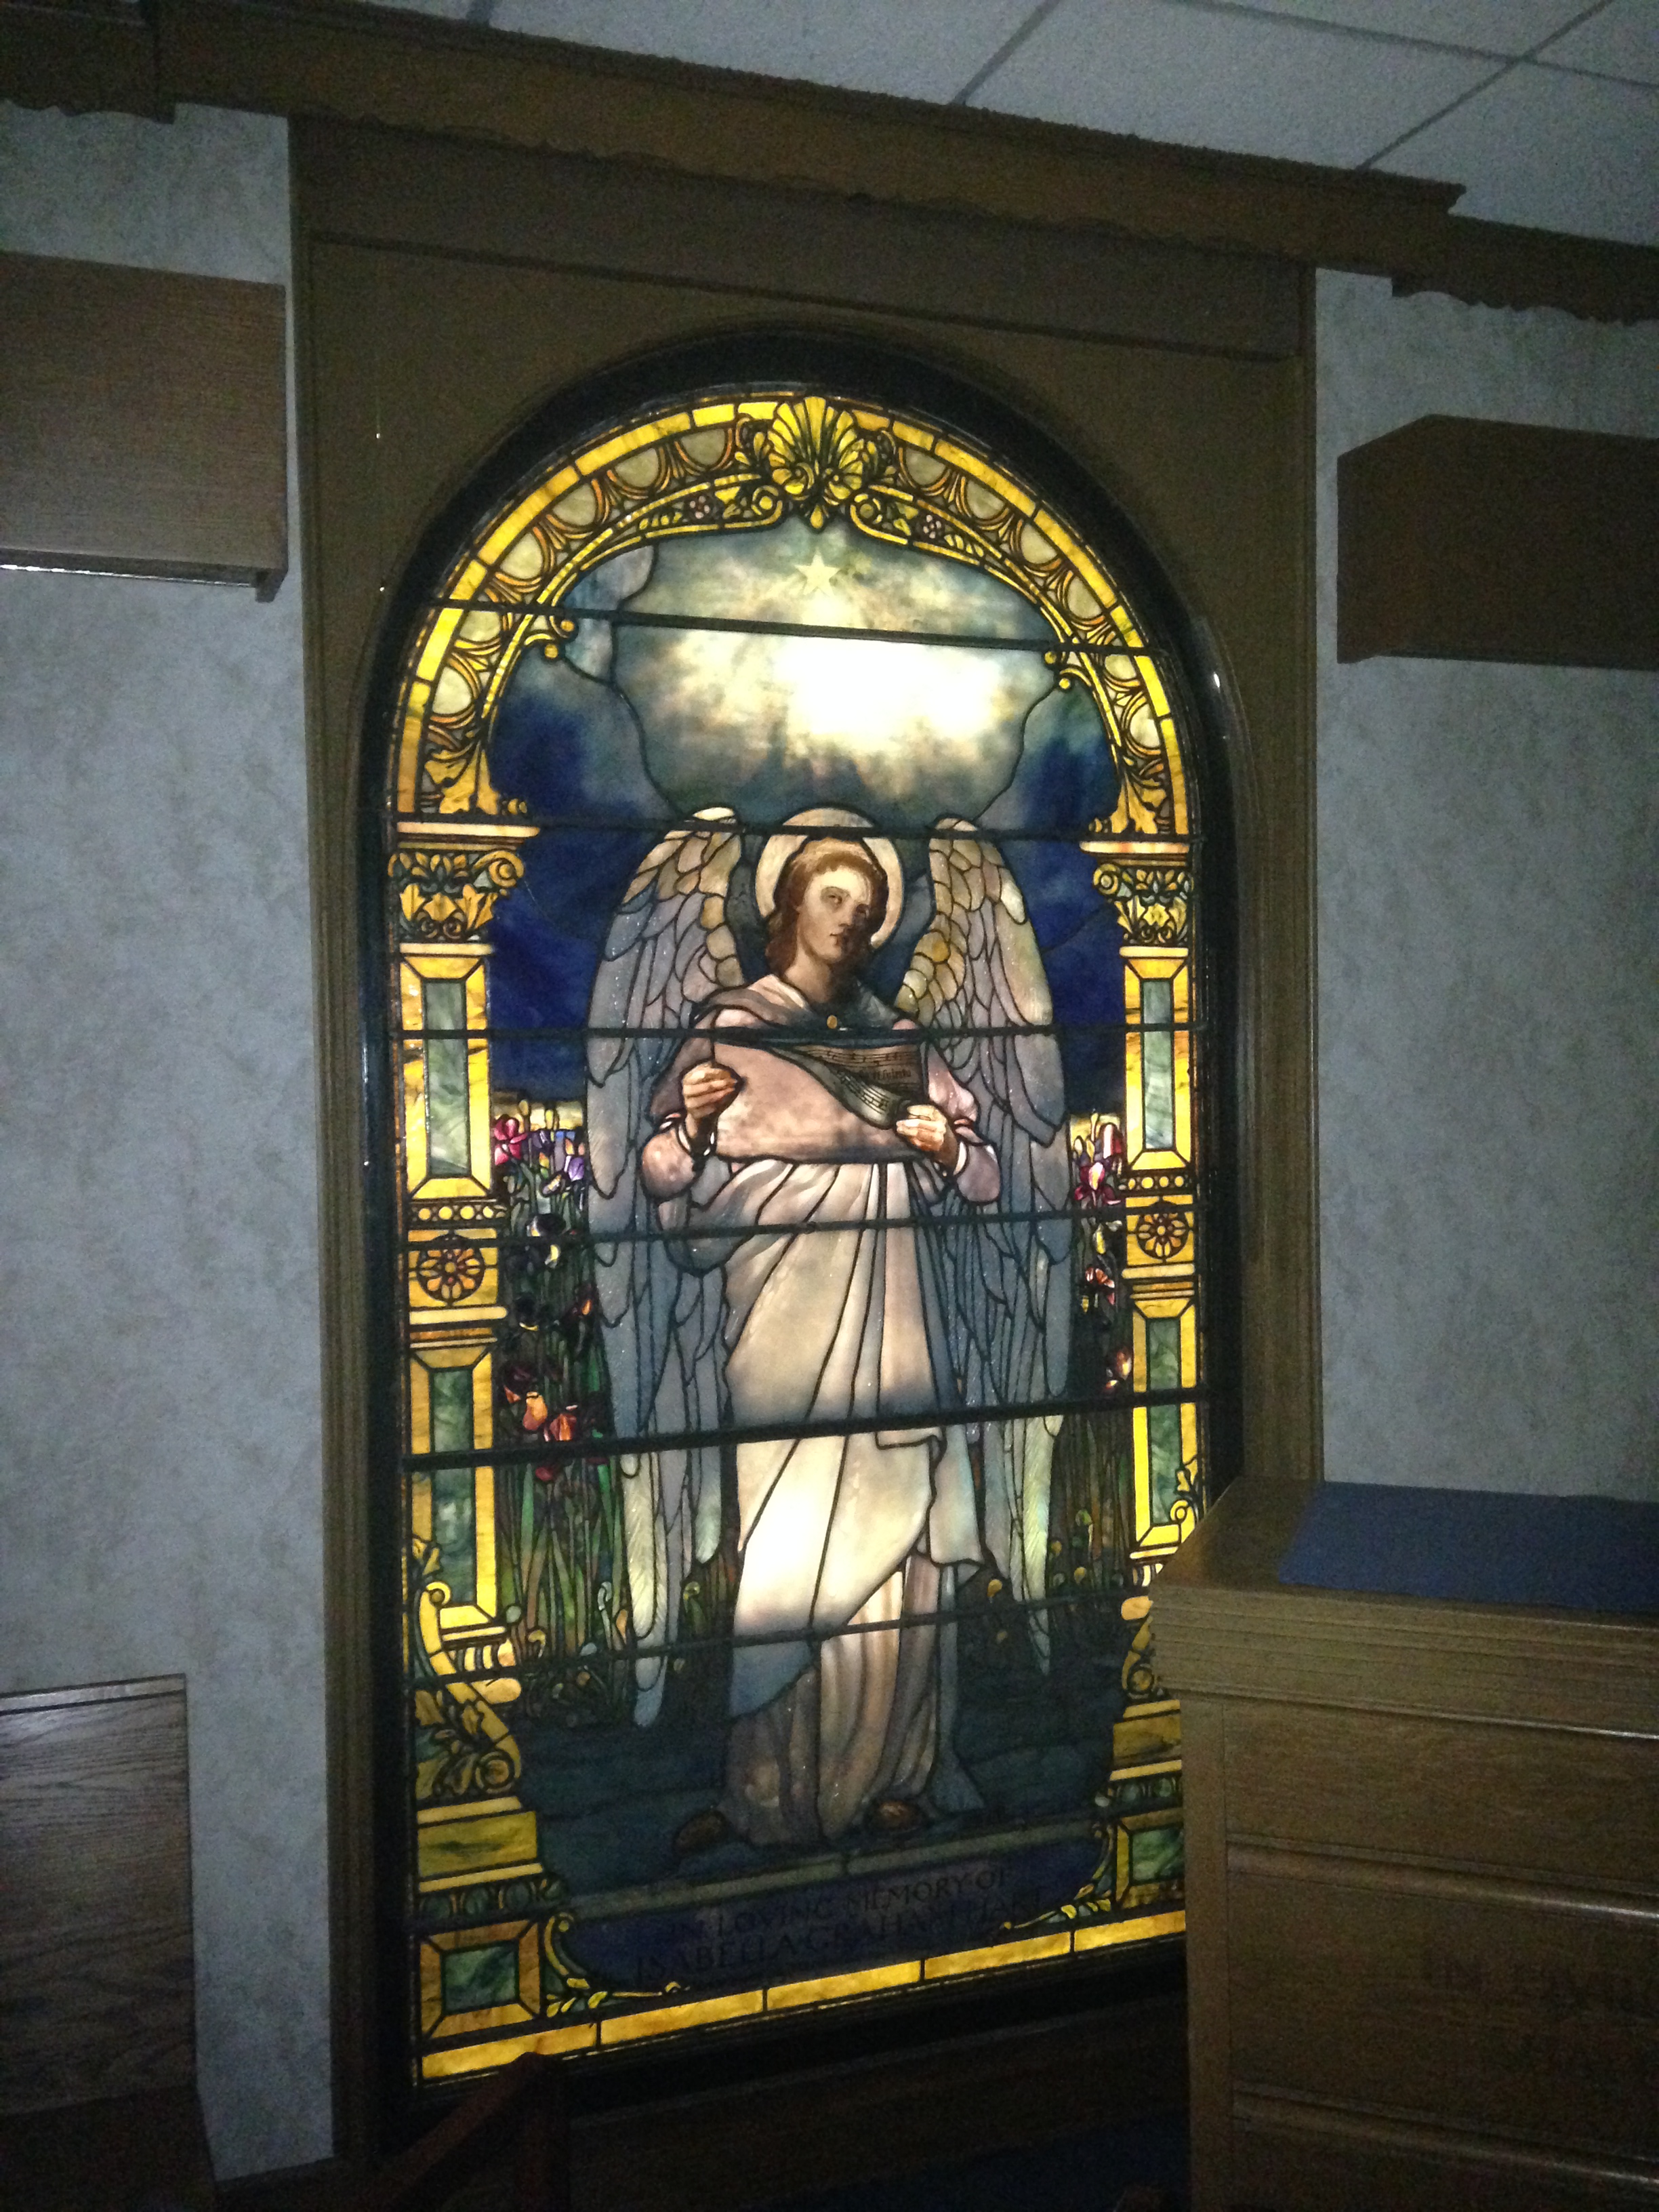 Isabella Graham Hart Memorial Window by Louis Comfort Tiffany at Rochester General Hospital in Rochester